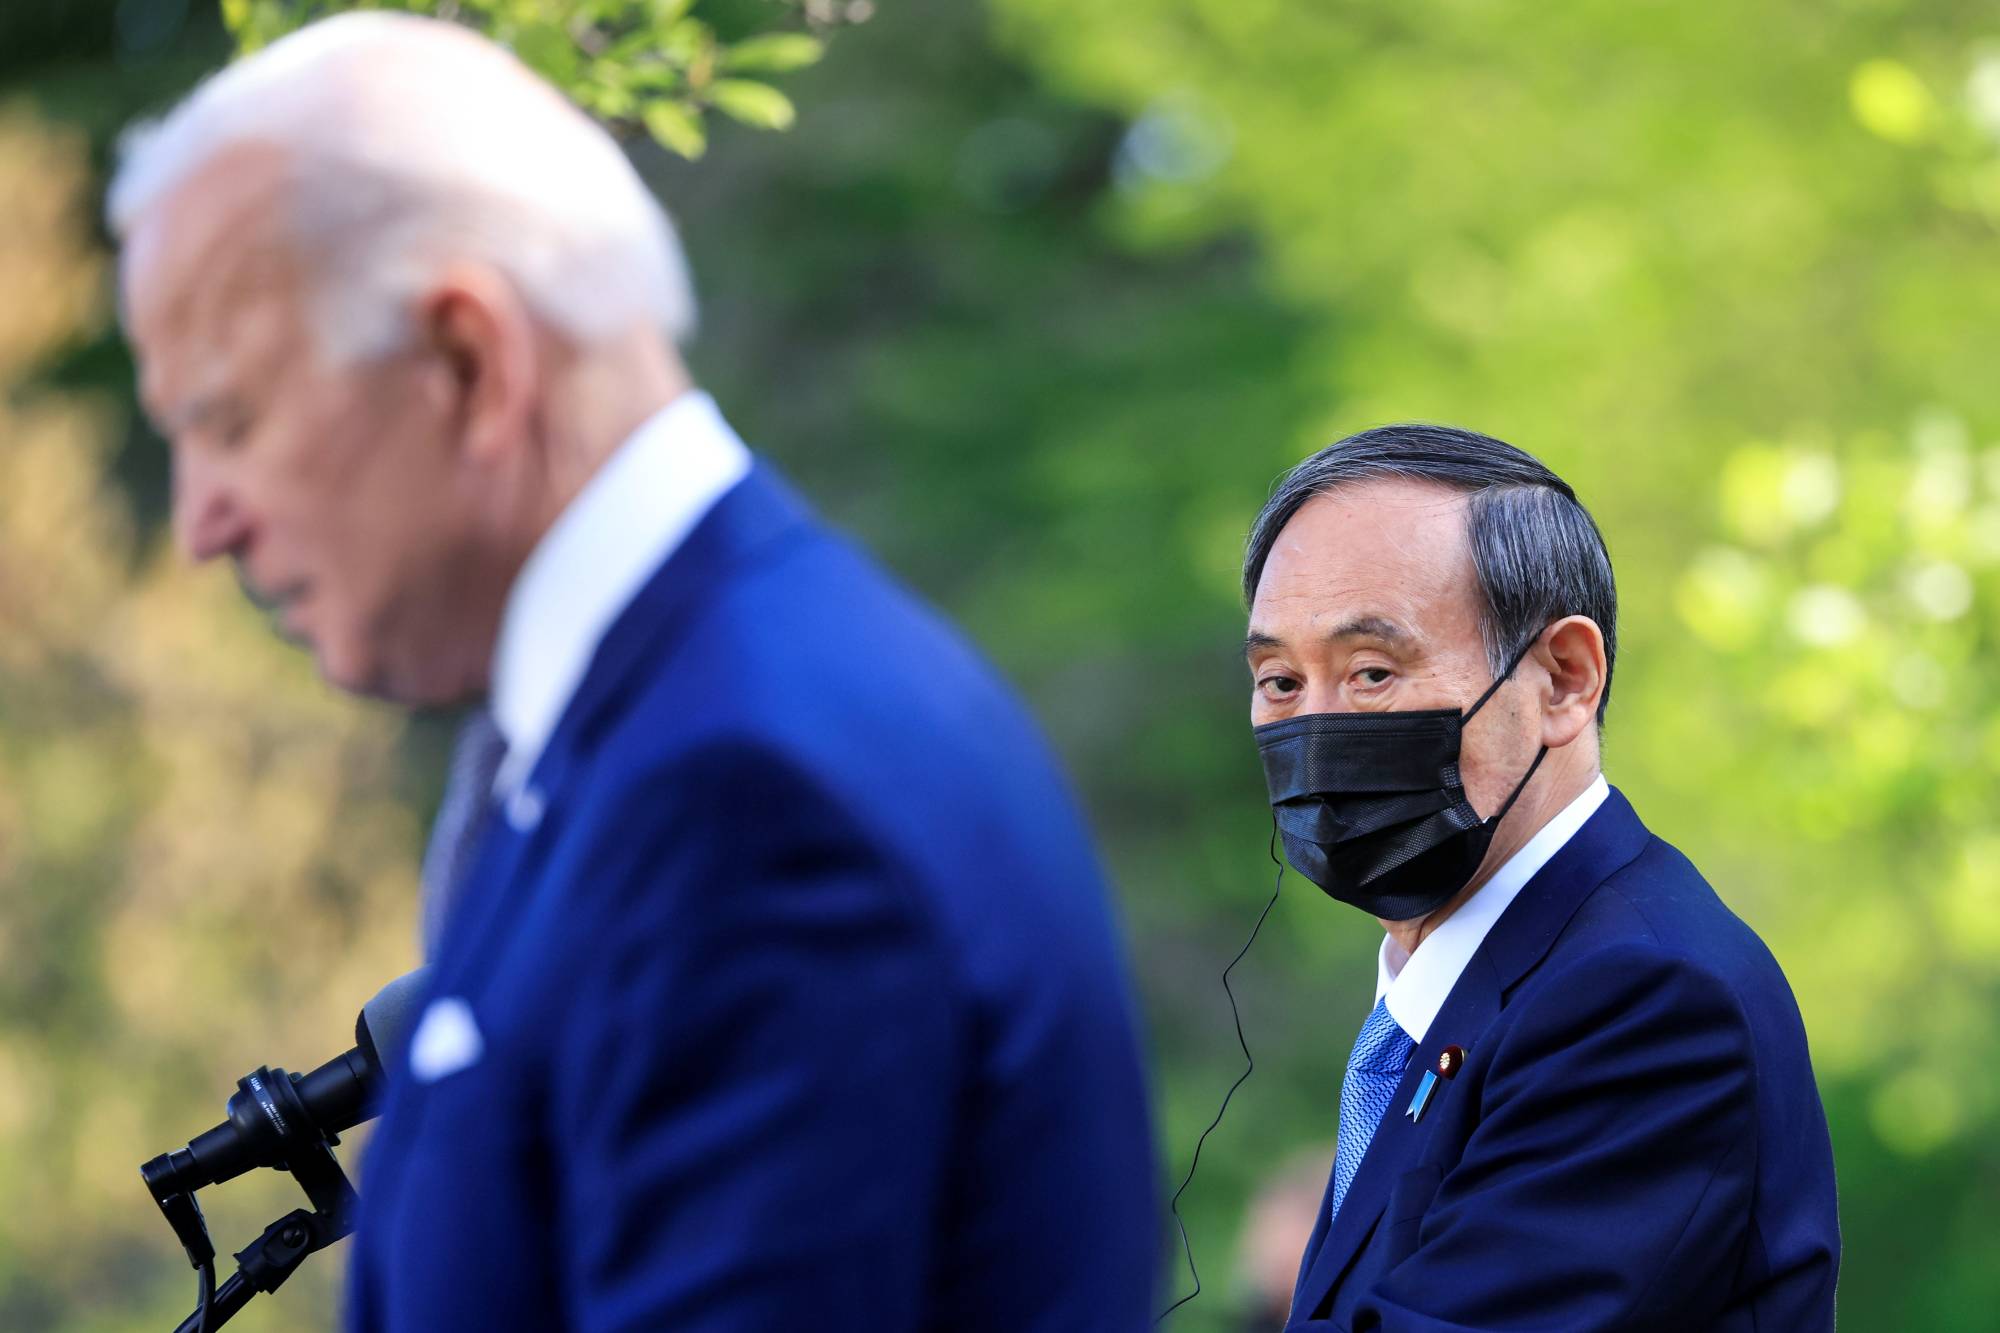 Prime Minister Yoshihide Suga and U.S. President Joe Biden hold a joint news conference at the White House on April 16. | REUTERS